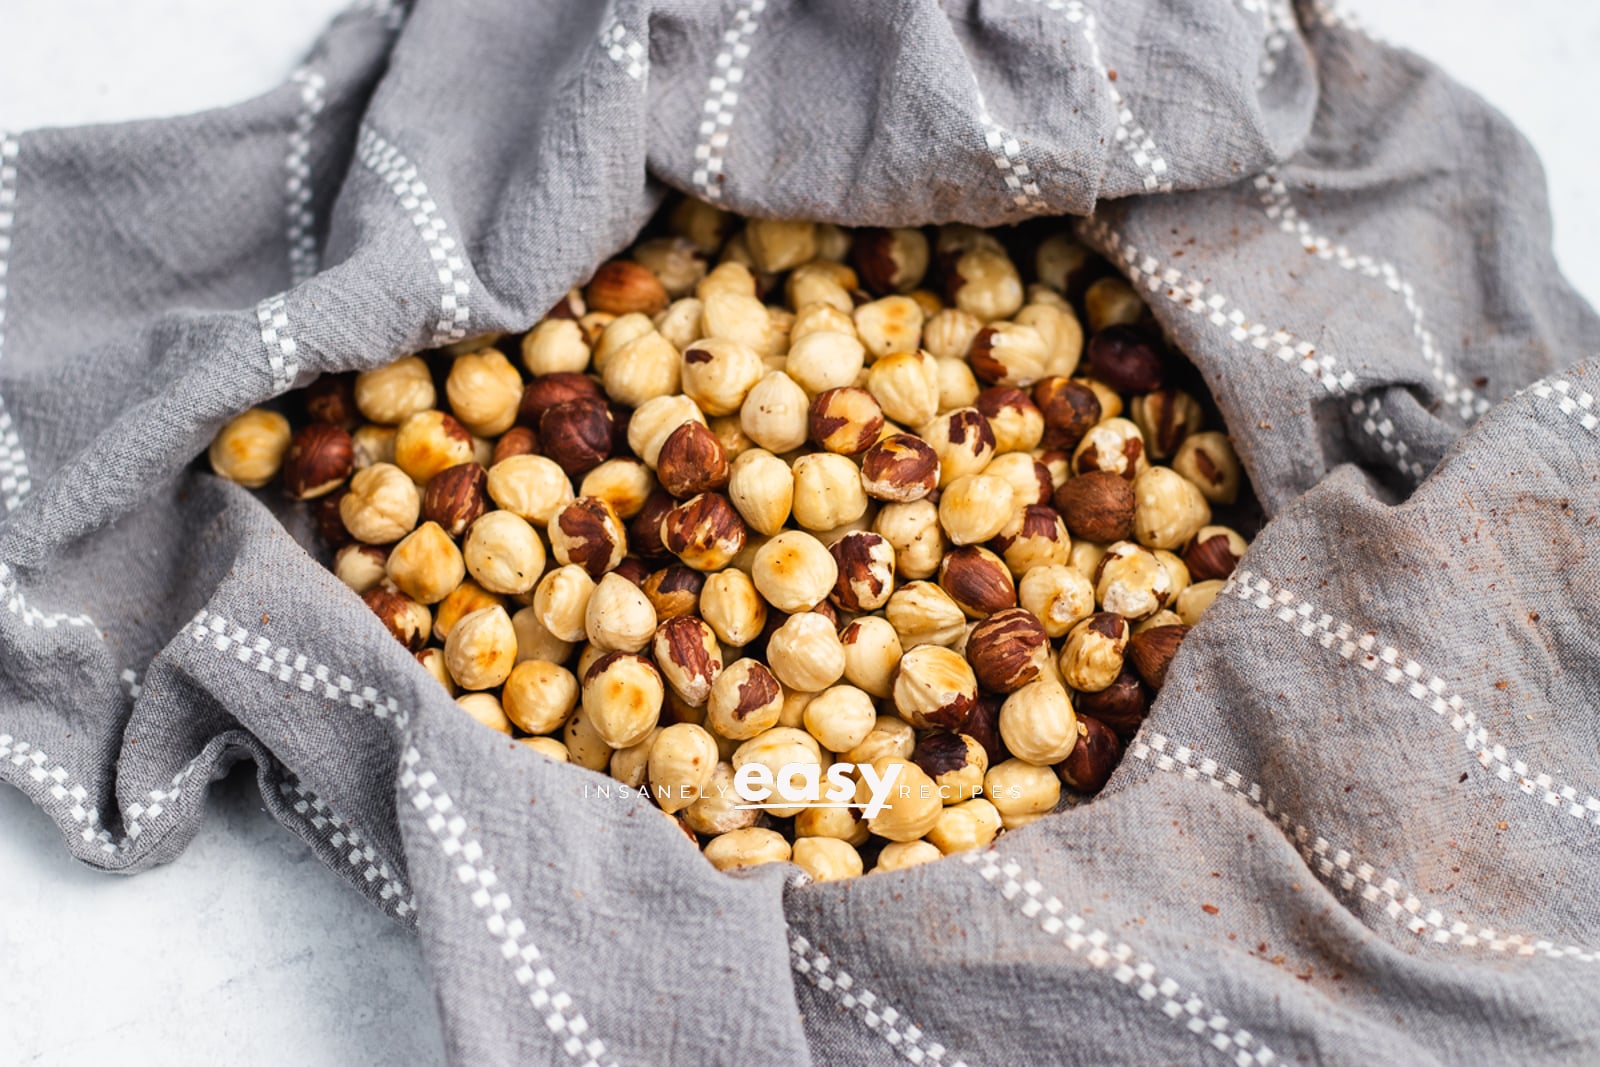 Photo of roasted hazelnuts in a kitchen towel, to rub off the skin of the hazelnut.